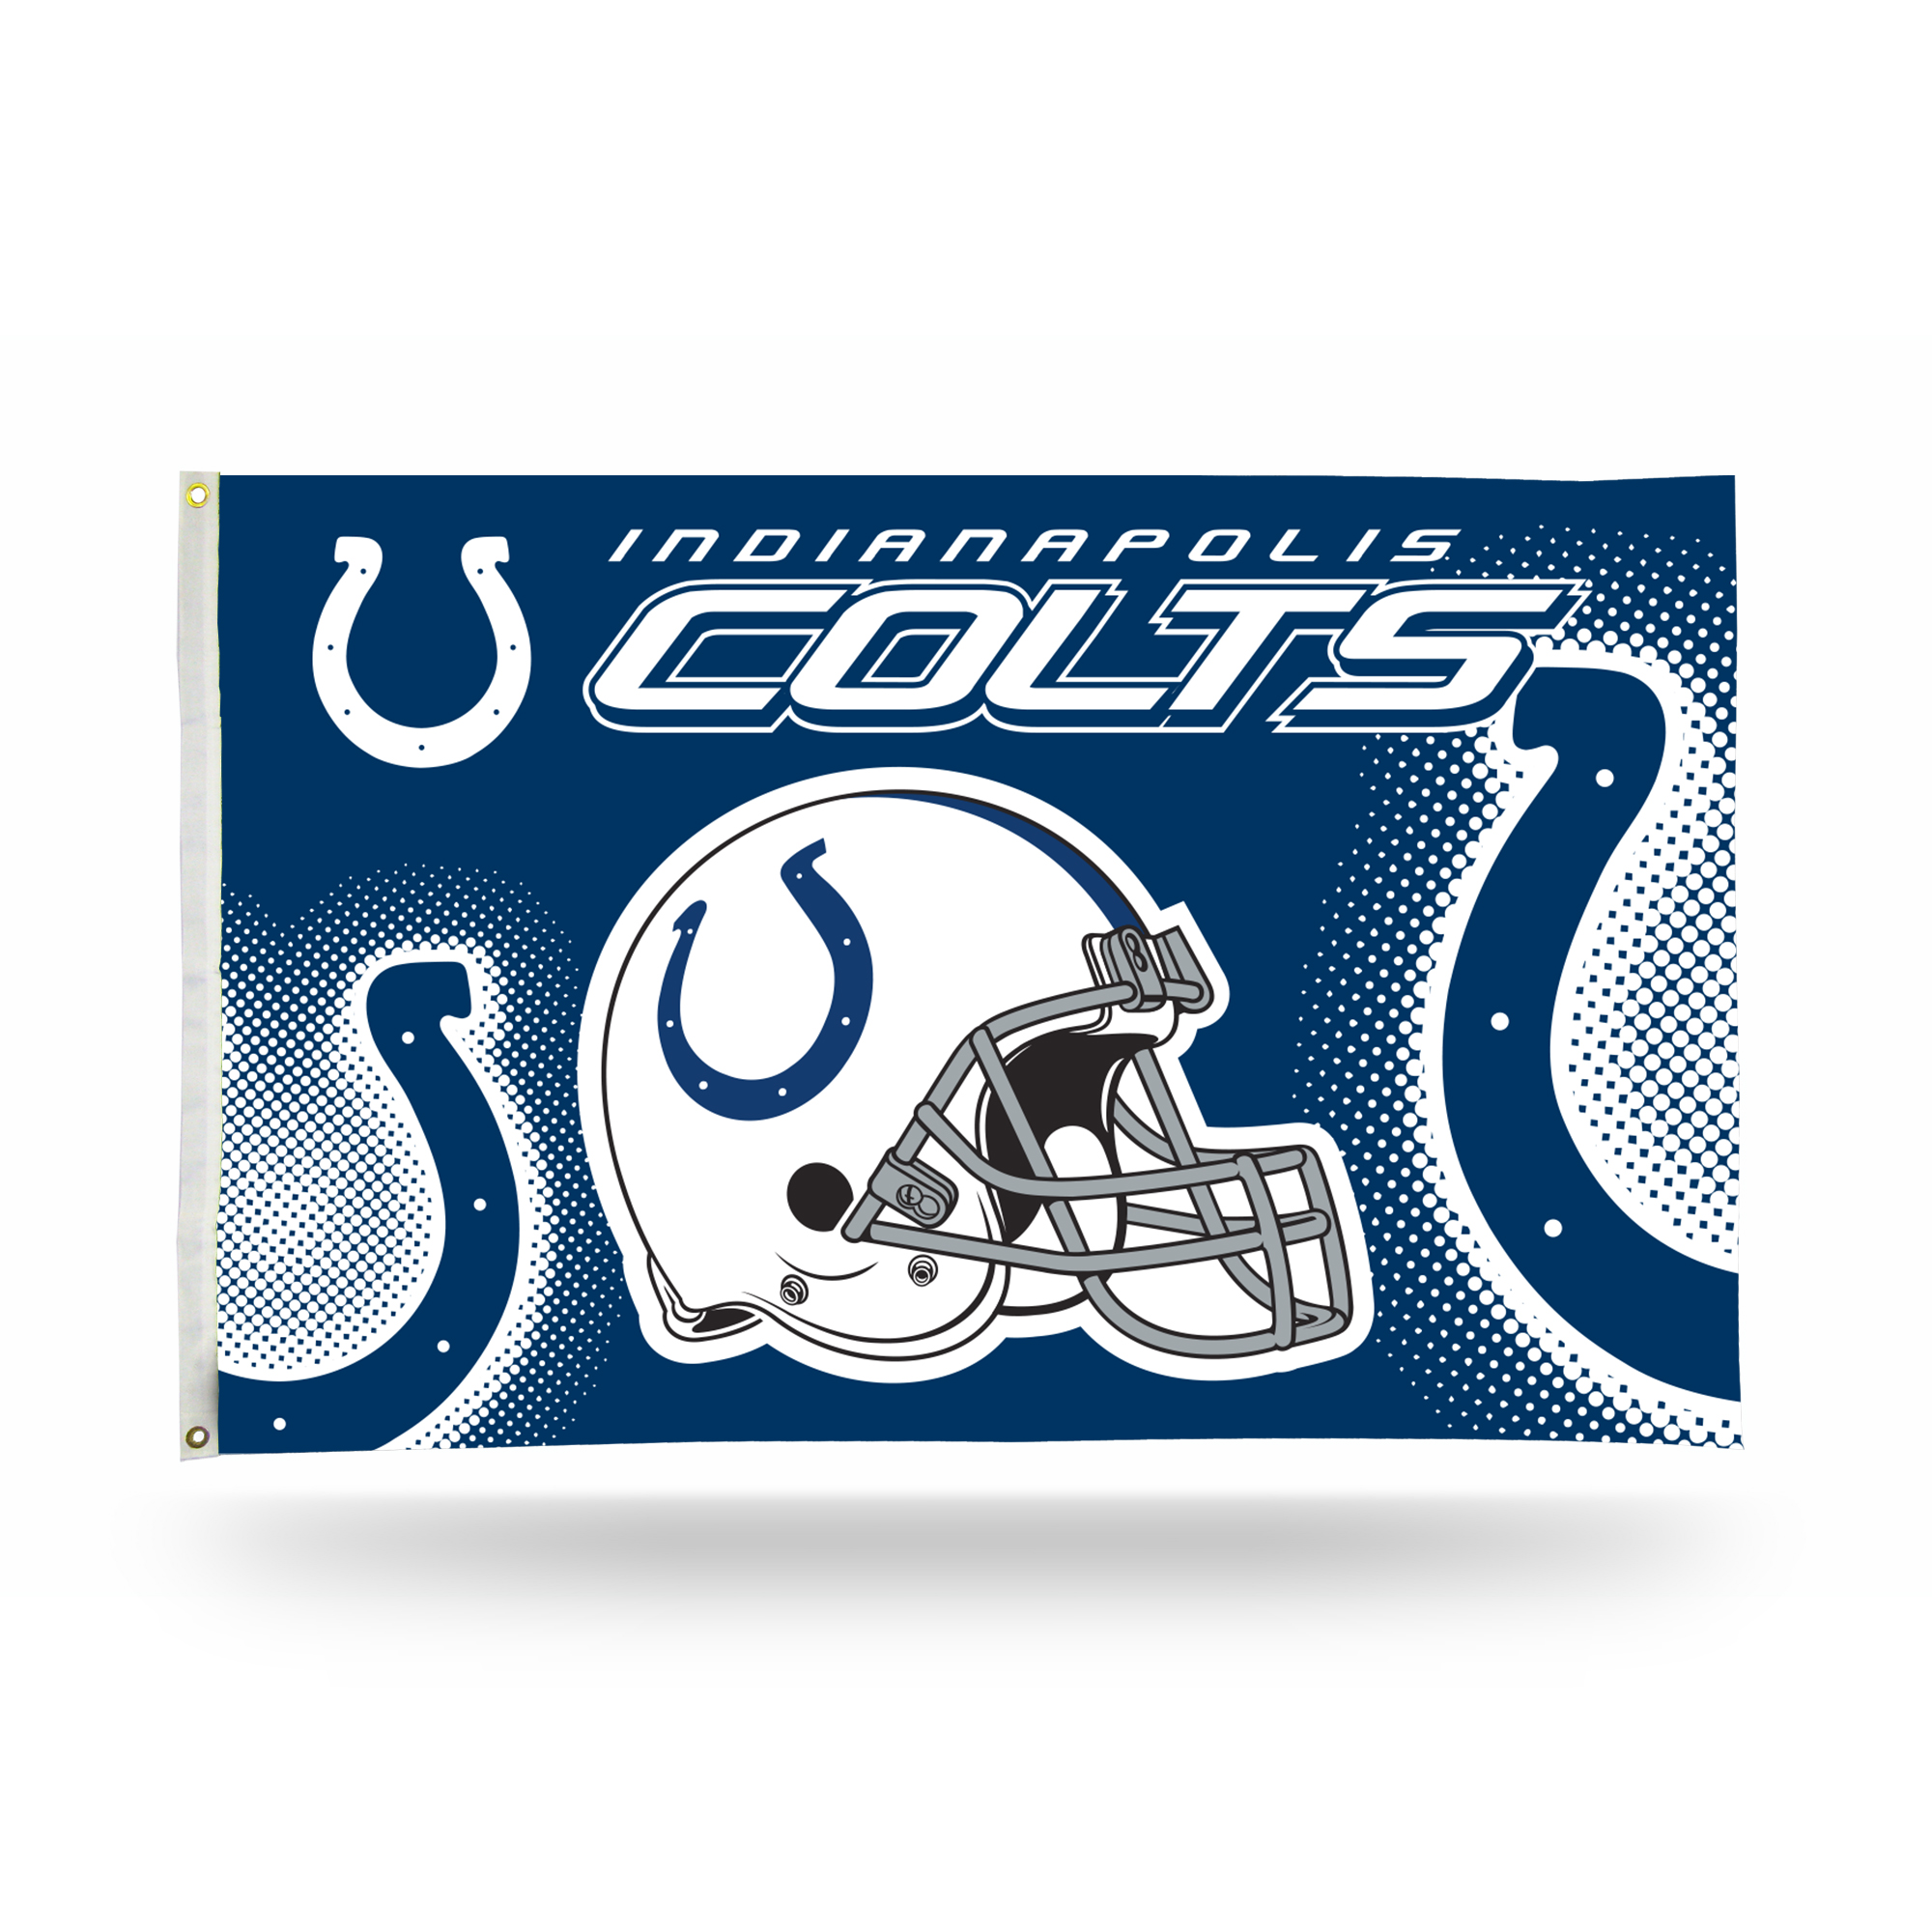 Rico NFL Rico Industries Indianapolis Colts Helmet 3' x 5' Banner Flag